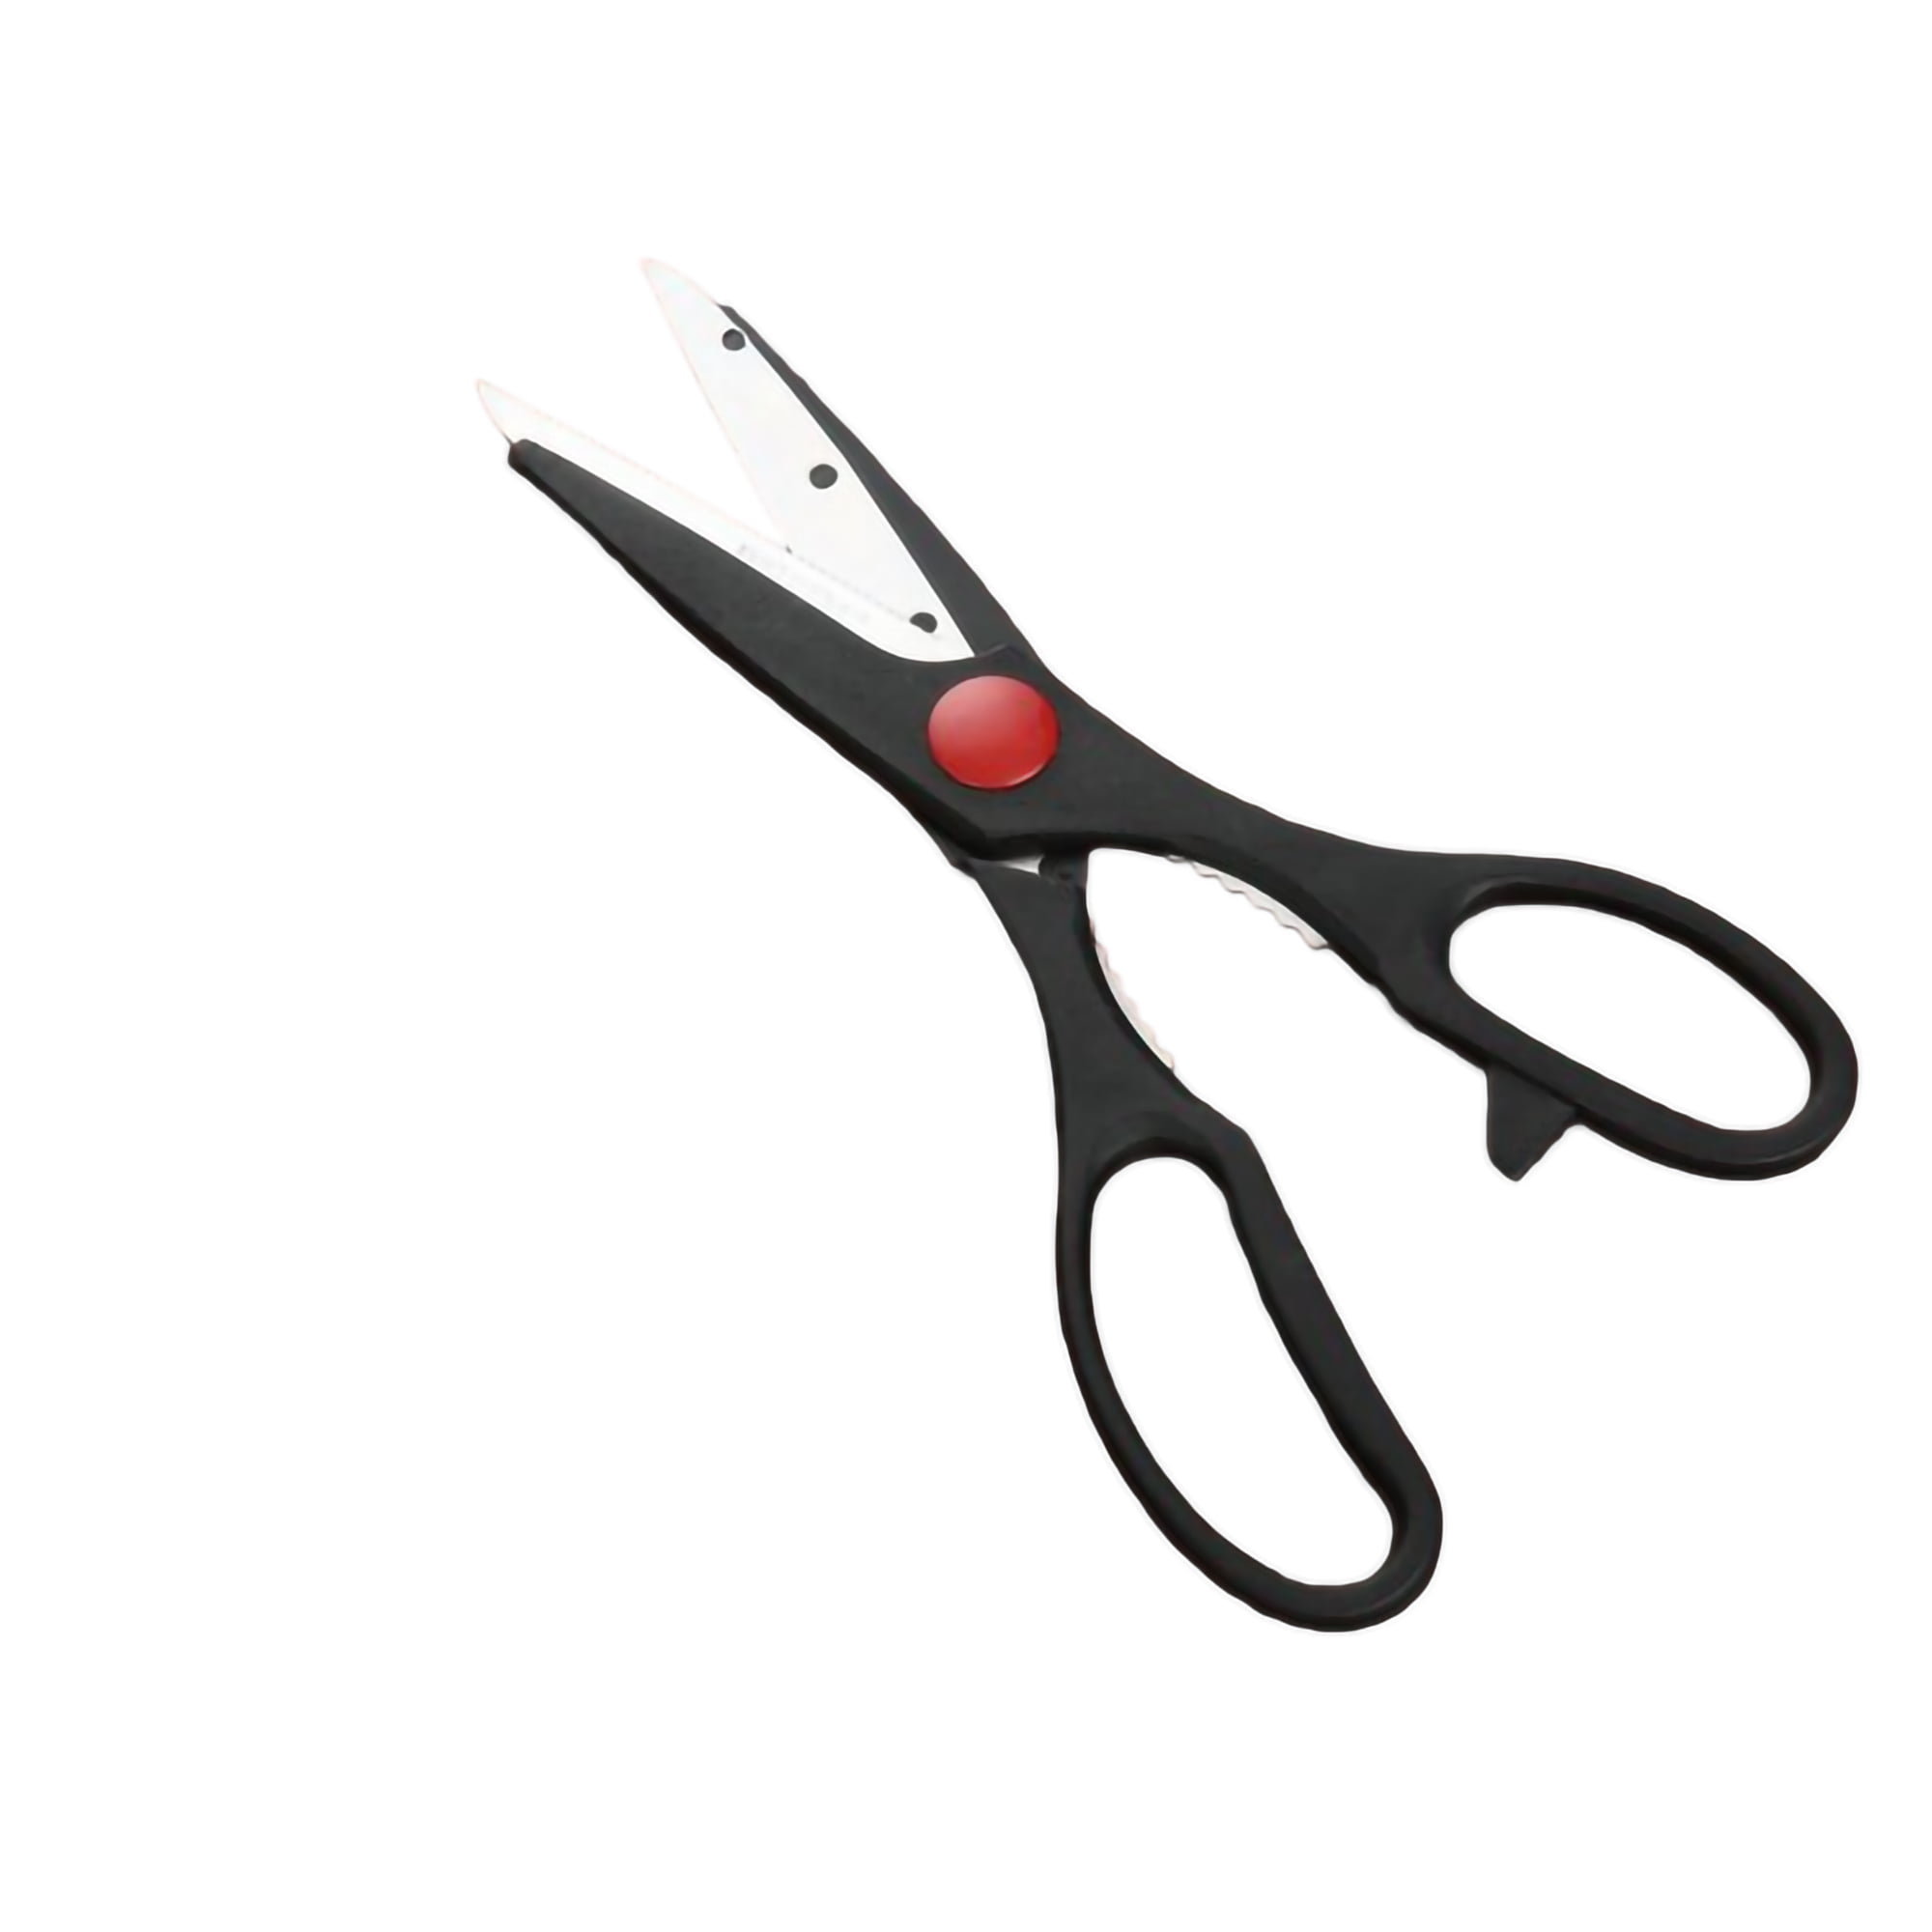 Mainstays Stainless Steel Utility Scissors Kitchen Shears with Black Grip 